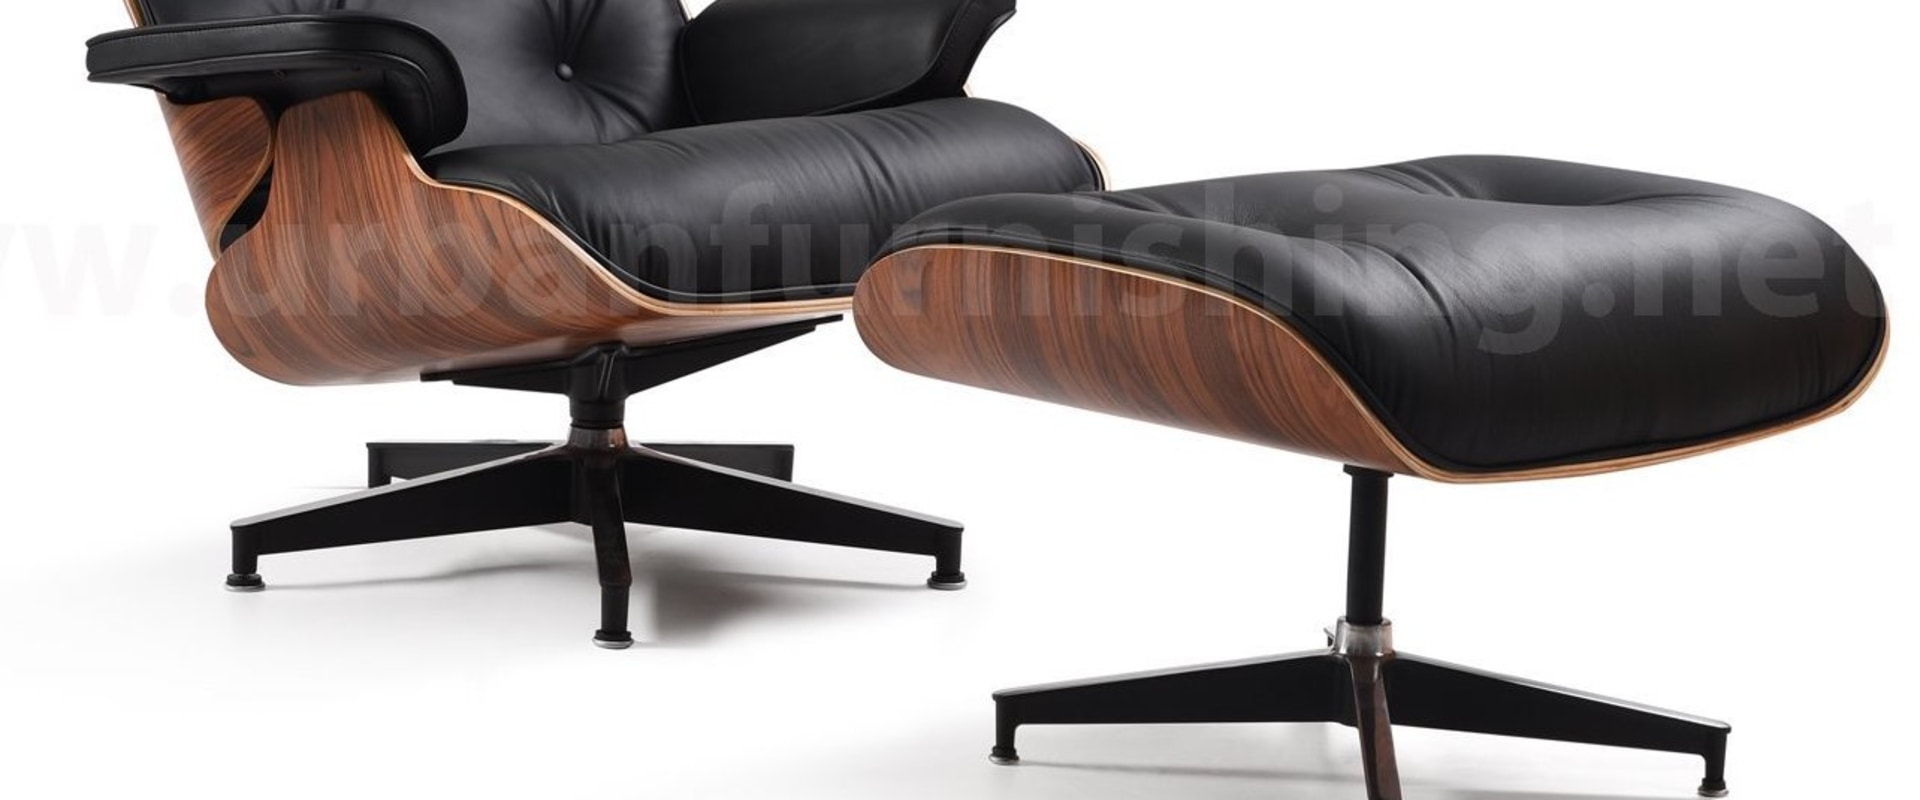 A Comprehensive Review of the Comfort Level of an Eames Office Chair Replica